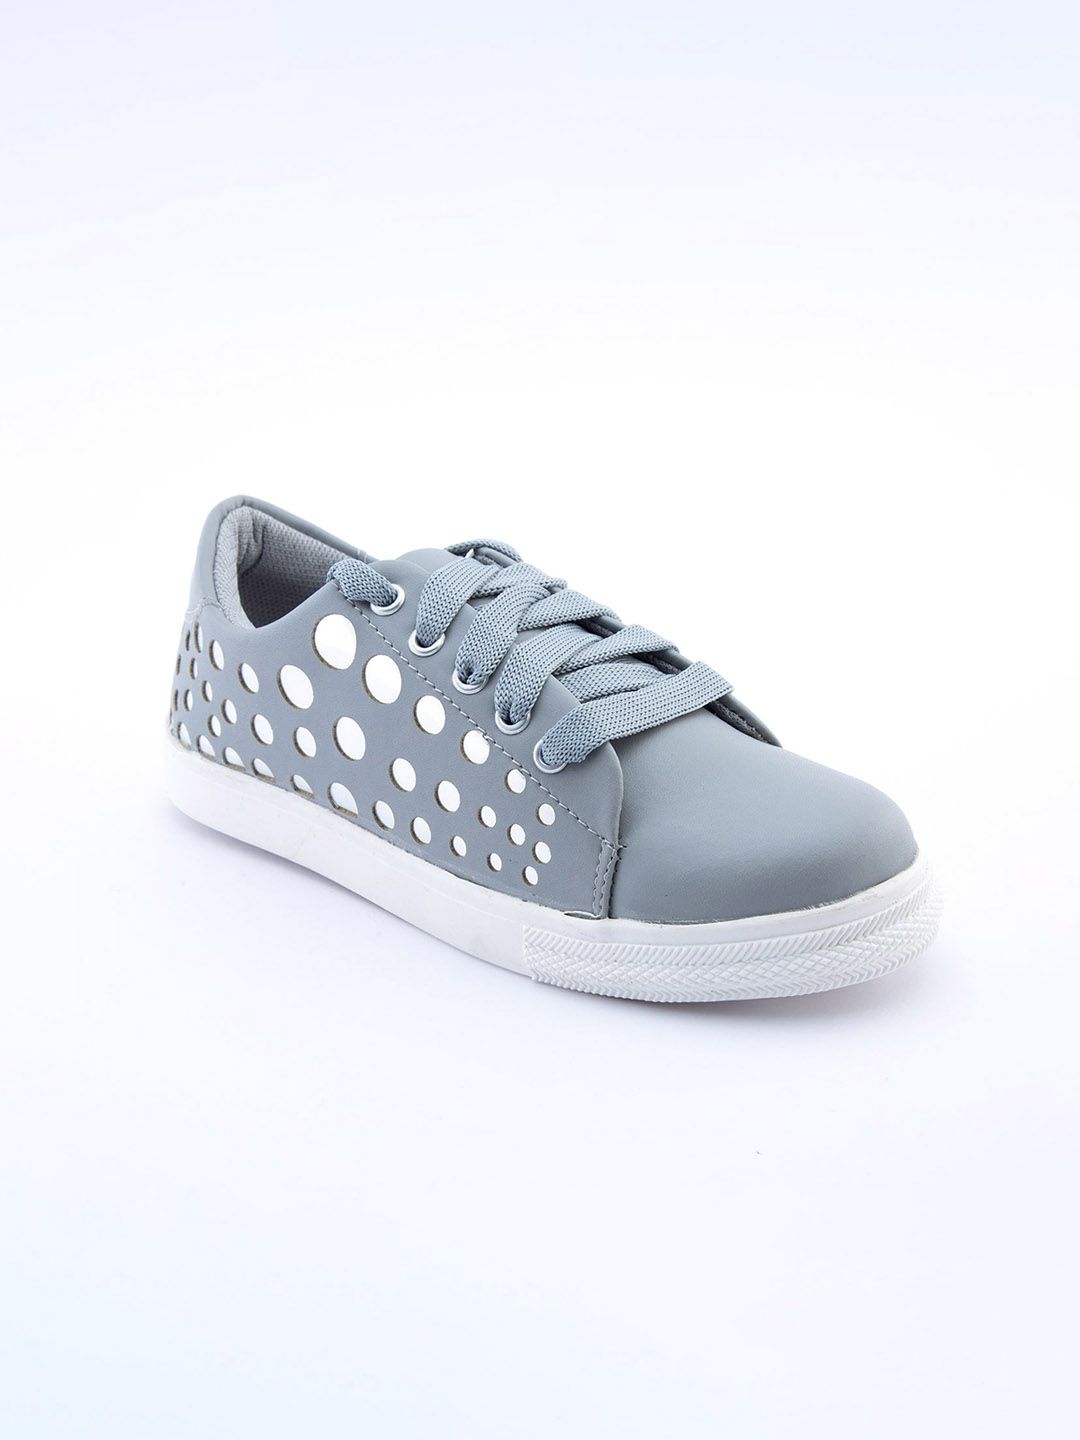 IMT Women Grey Printed Sneakers Price in India